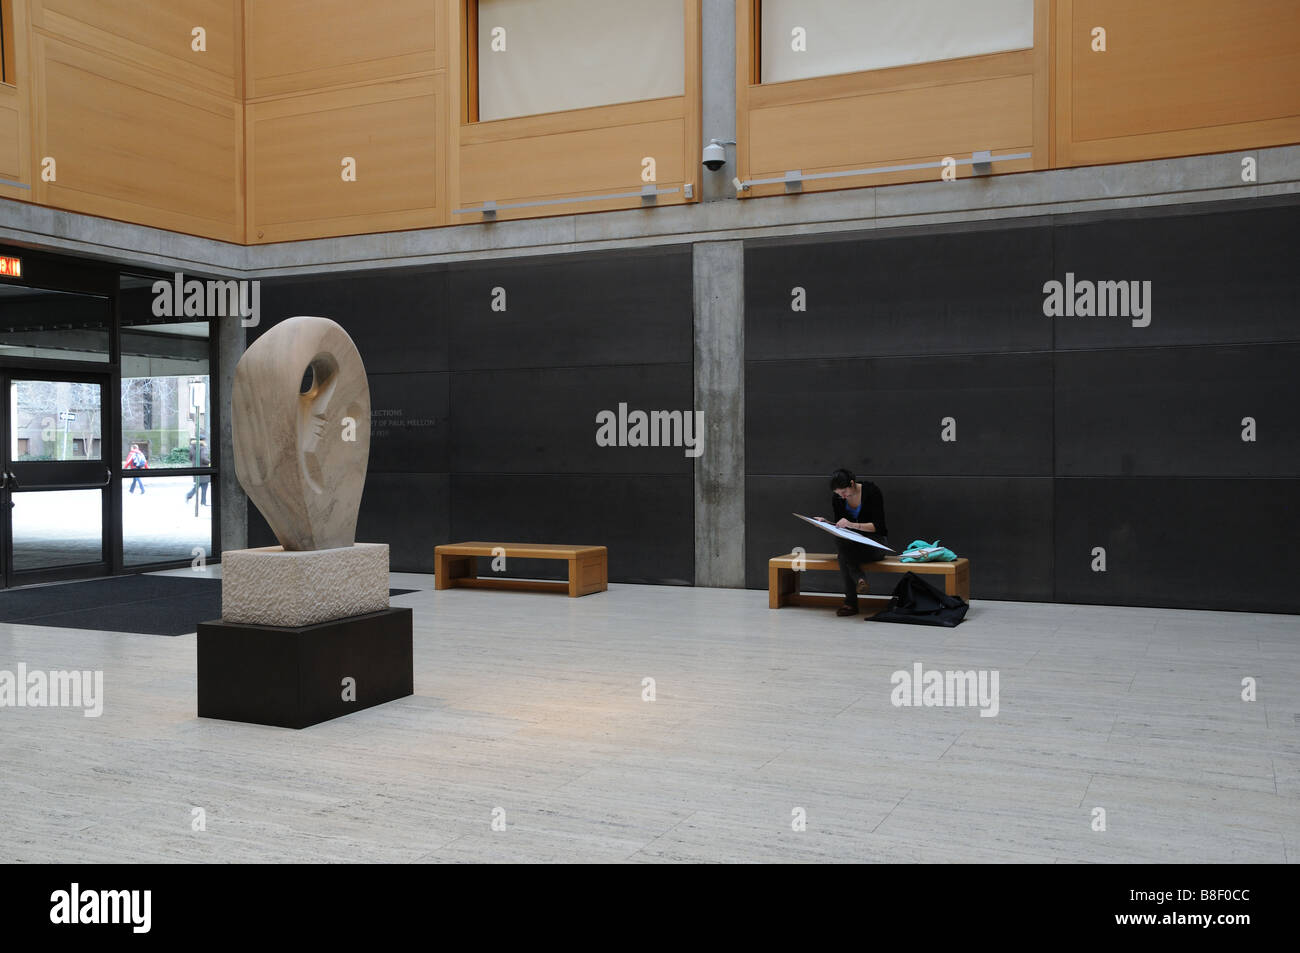 The entrance of the Yale Center for British Art in New Haven, Conn., with a sculpture by Barbara Hepworth. Stock Photo